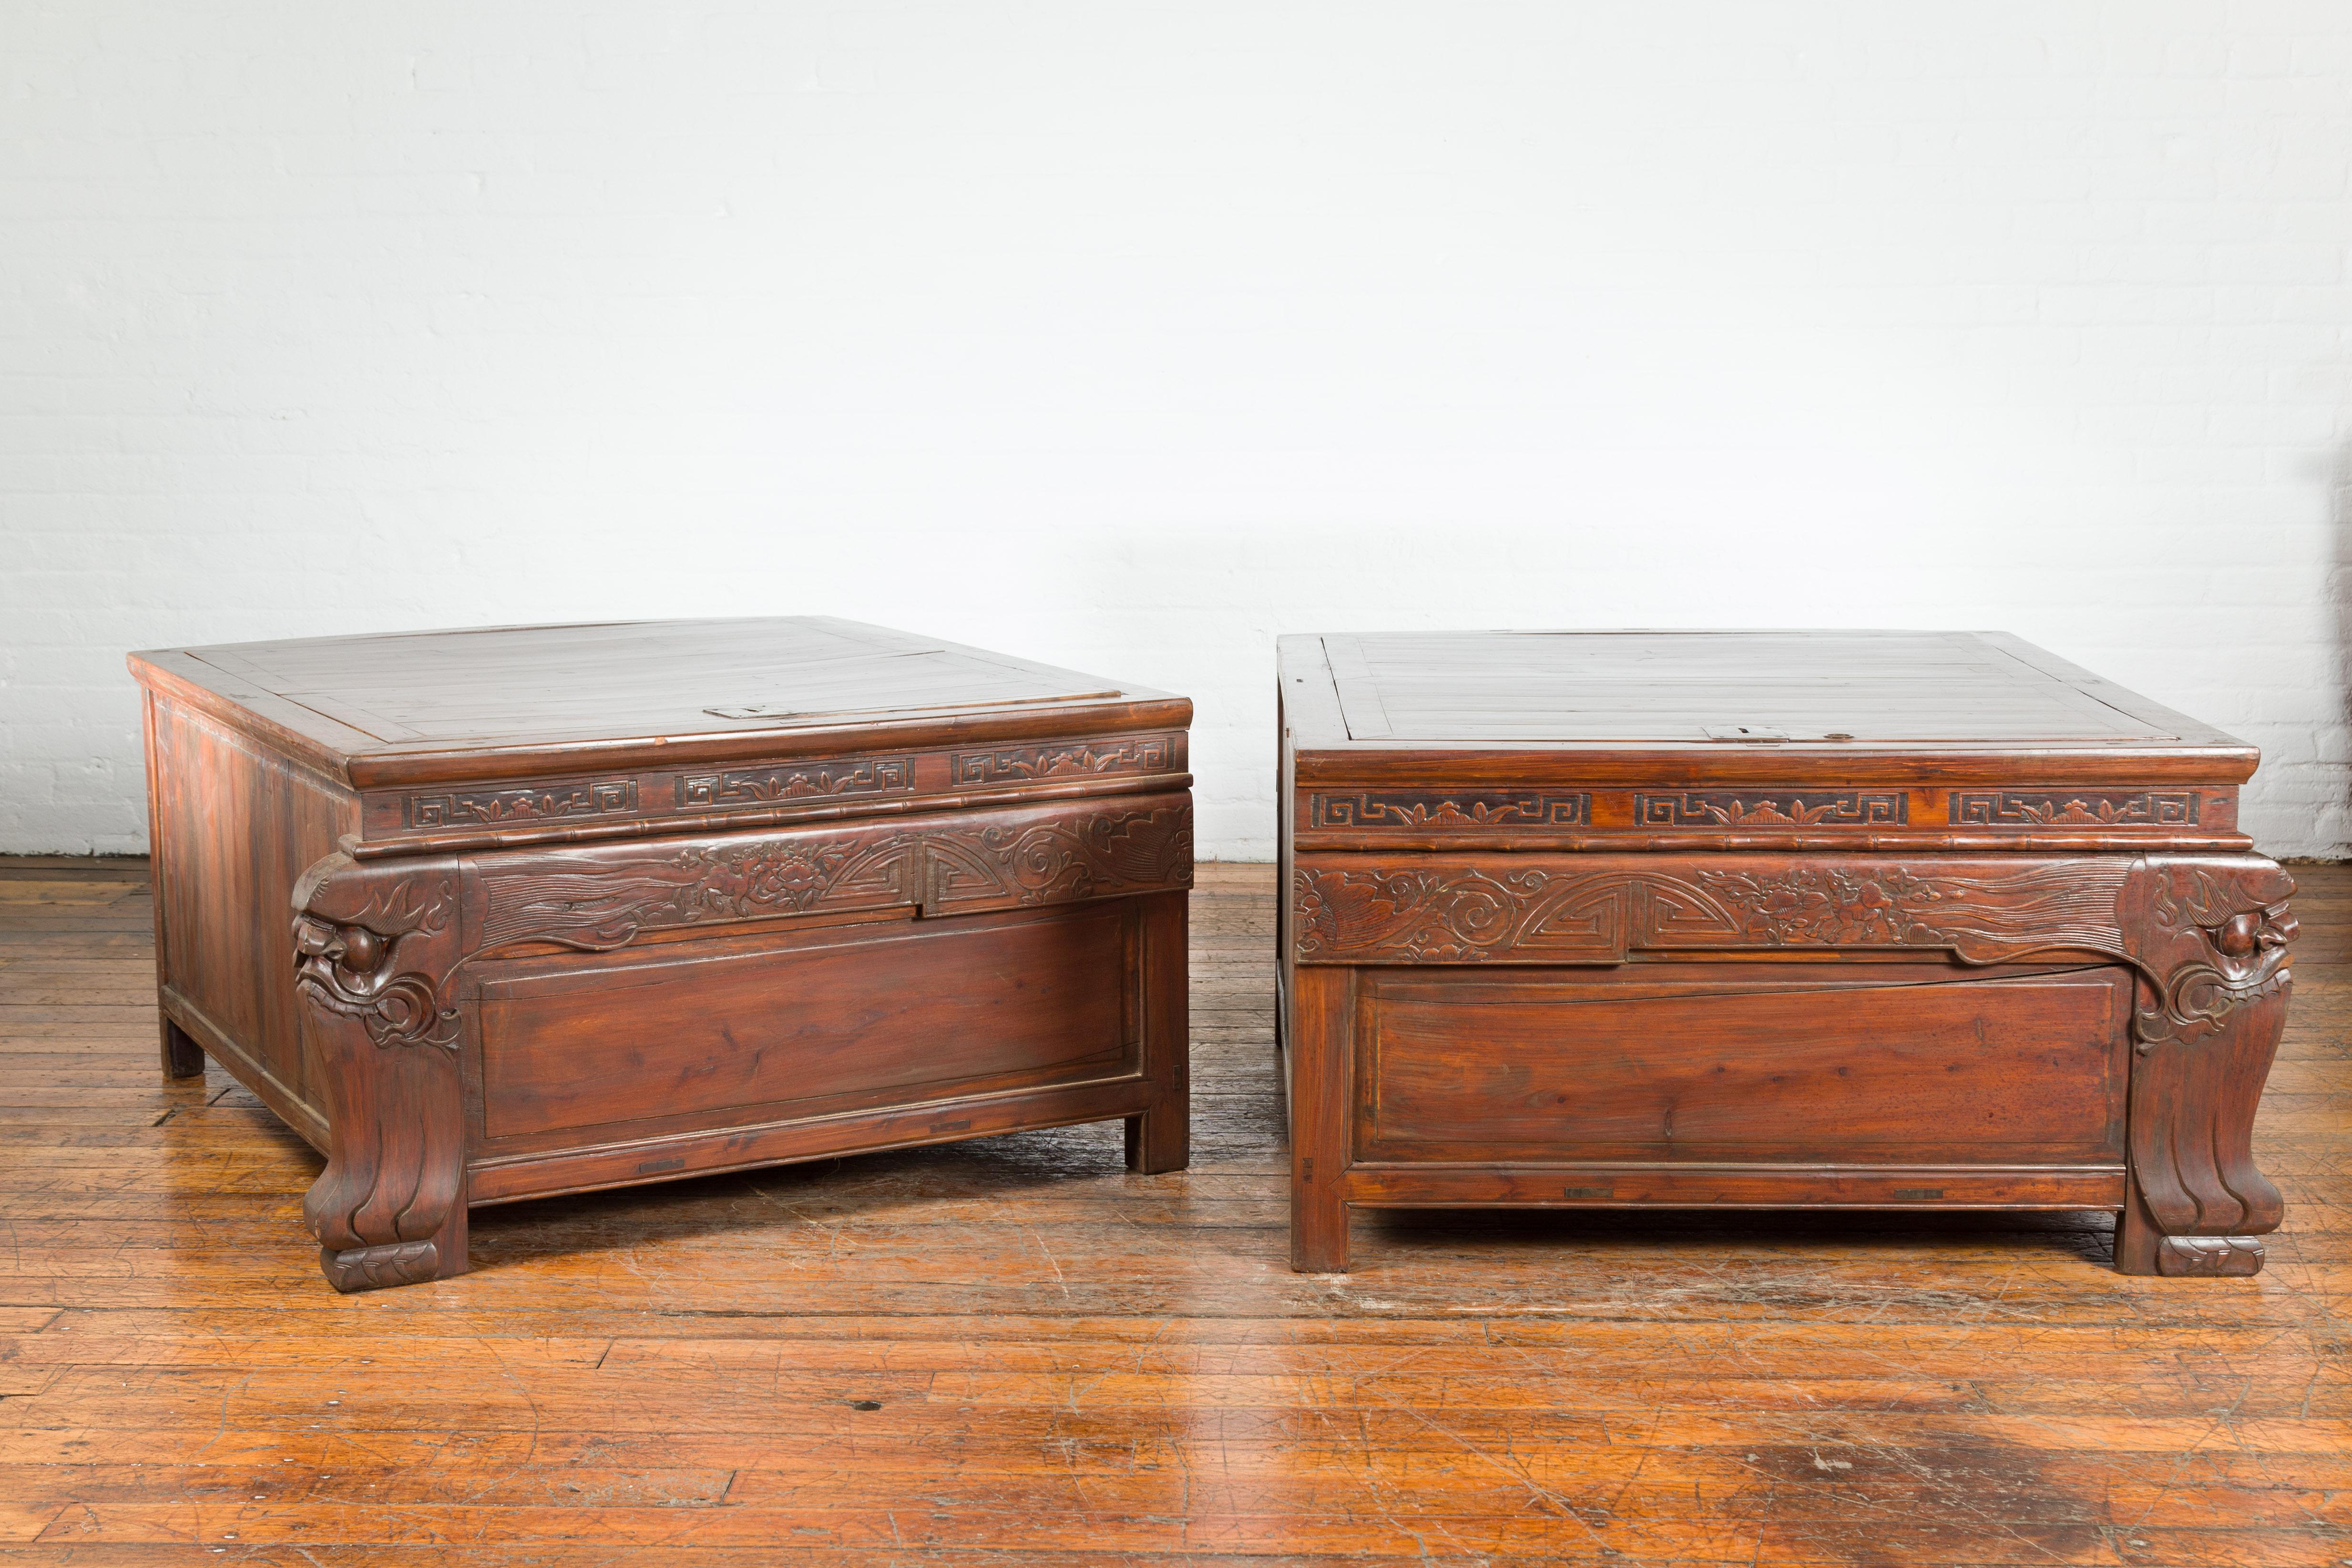 Pair of Chinese Antique Chests with Carved Legs Made into a Long Coffee Table In Good Condition For Sale In Yonkers, NY